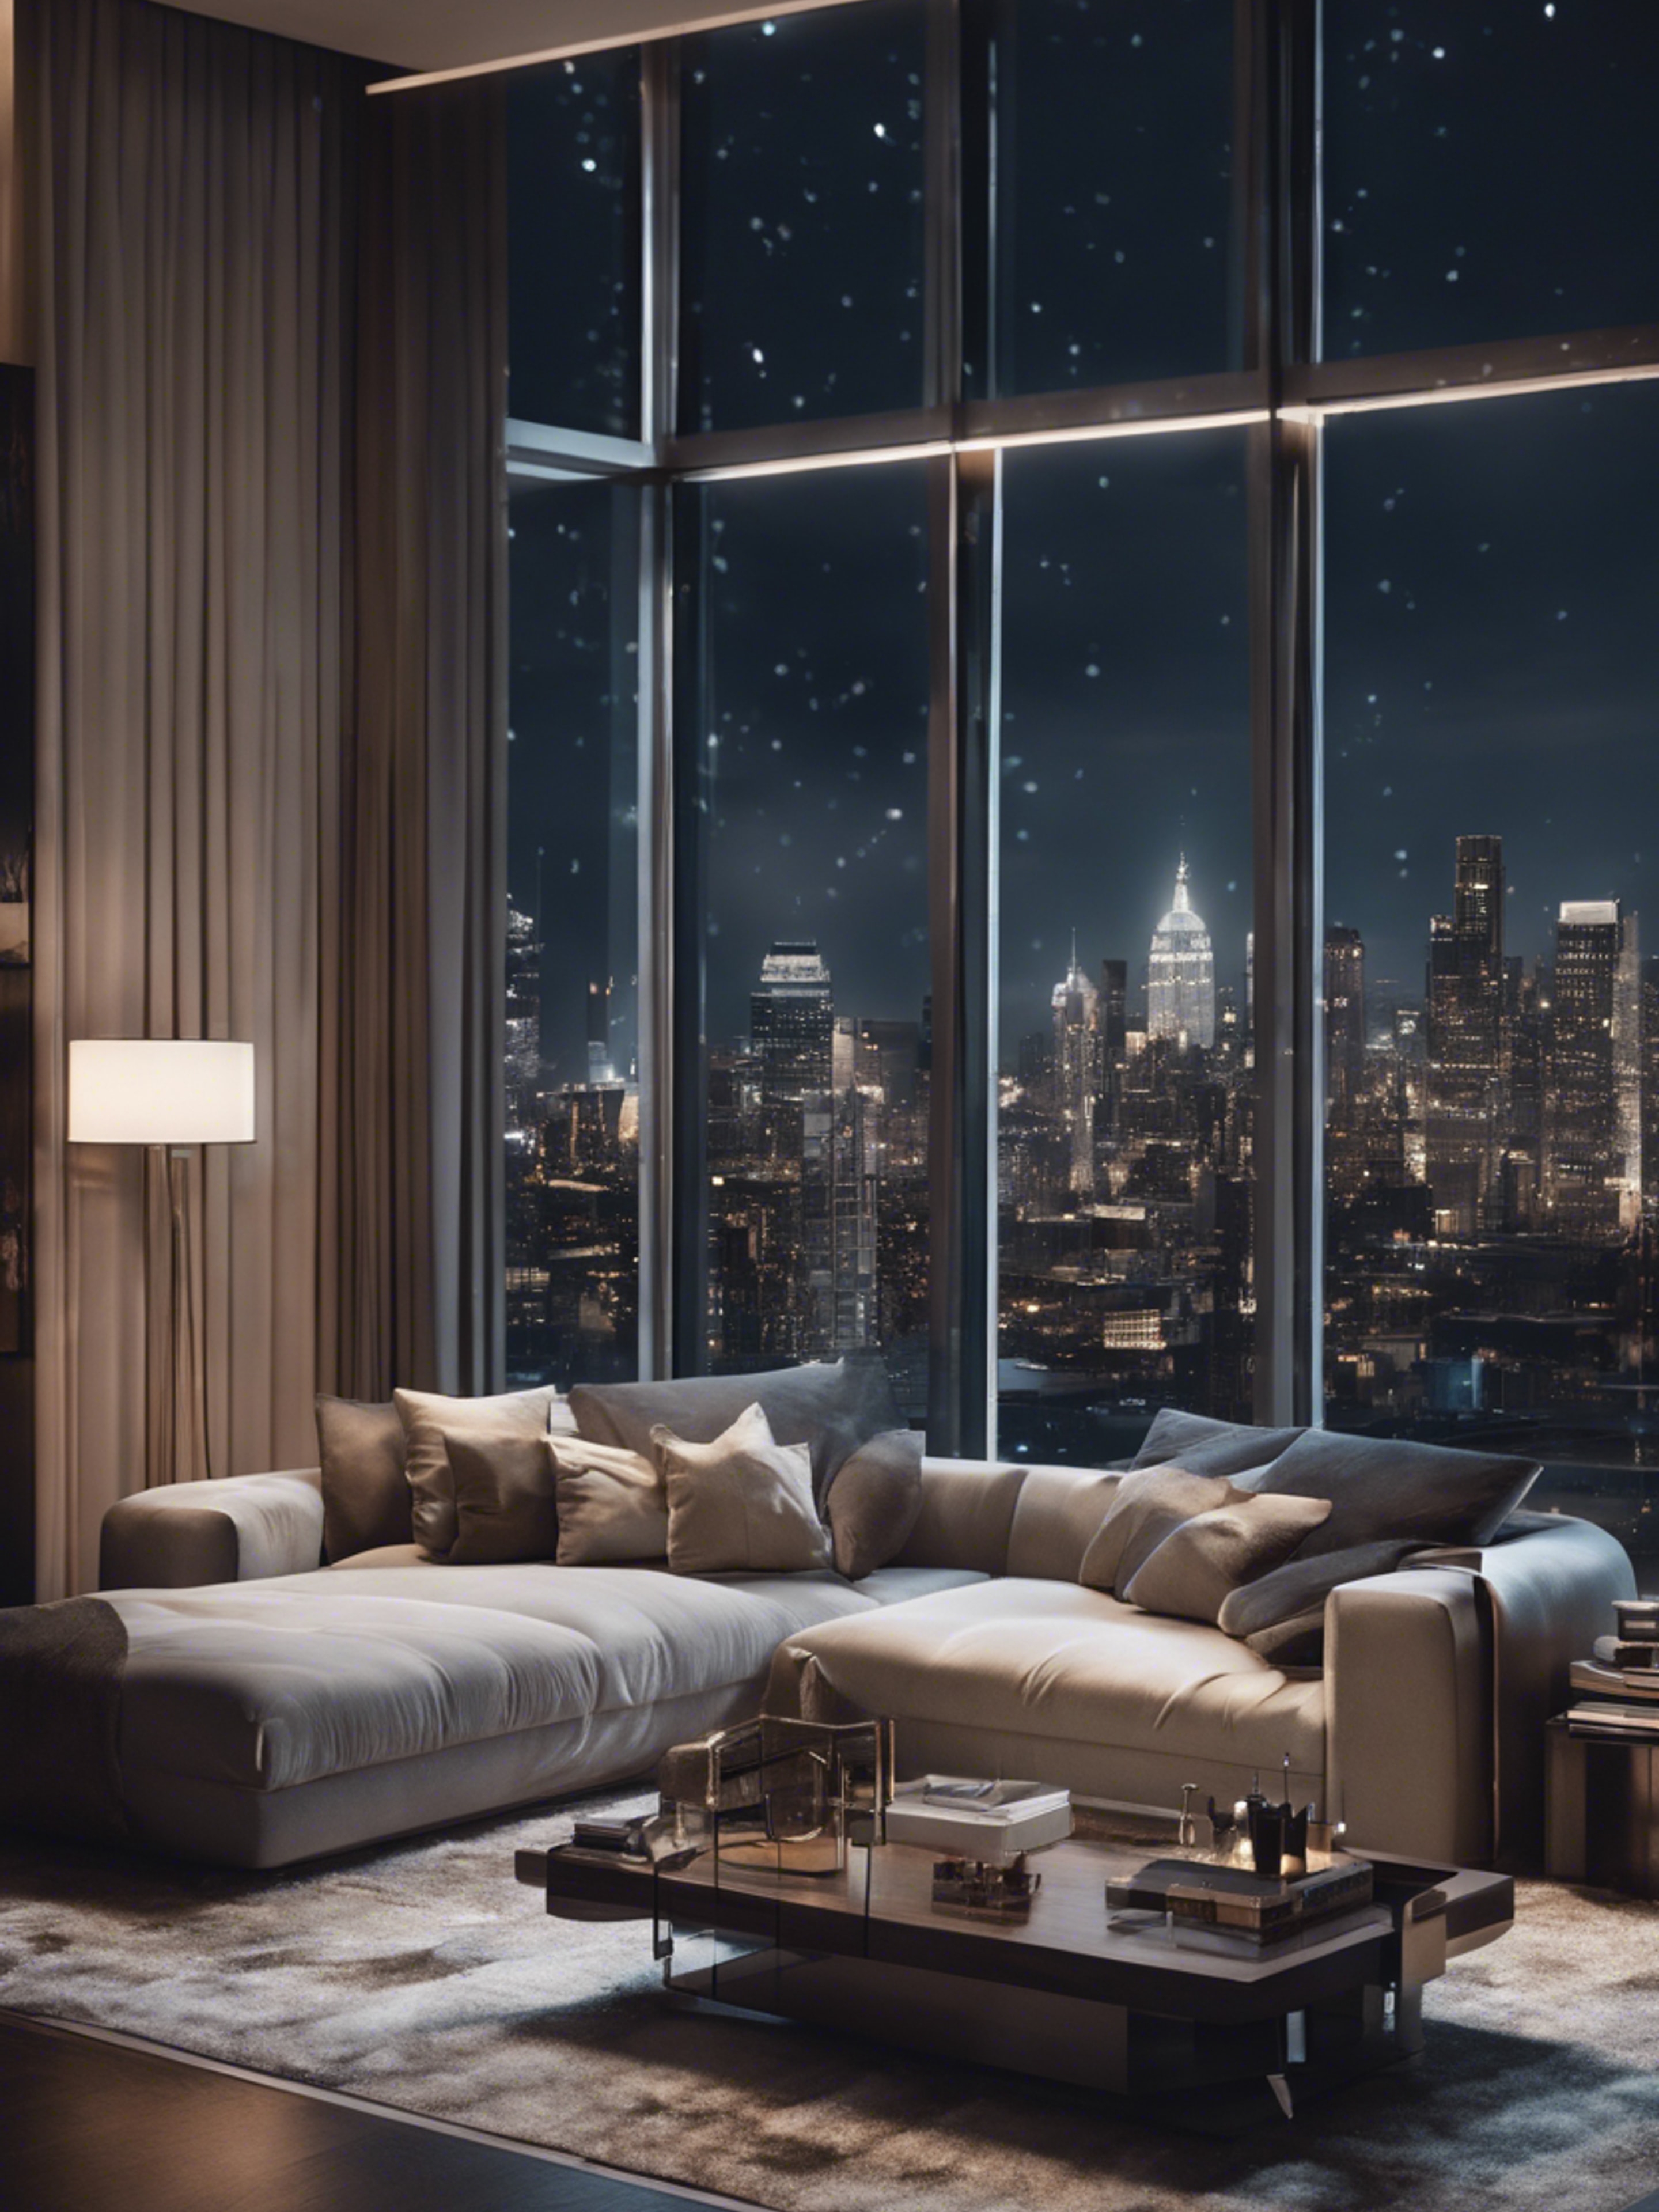 An ultra modern penthouse living room with floor-to-ceiling windows overlooking a night cityscape, adorned with stylish and minimalist decor. Tapeta[32f92be3d45a43a5bc6a]